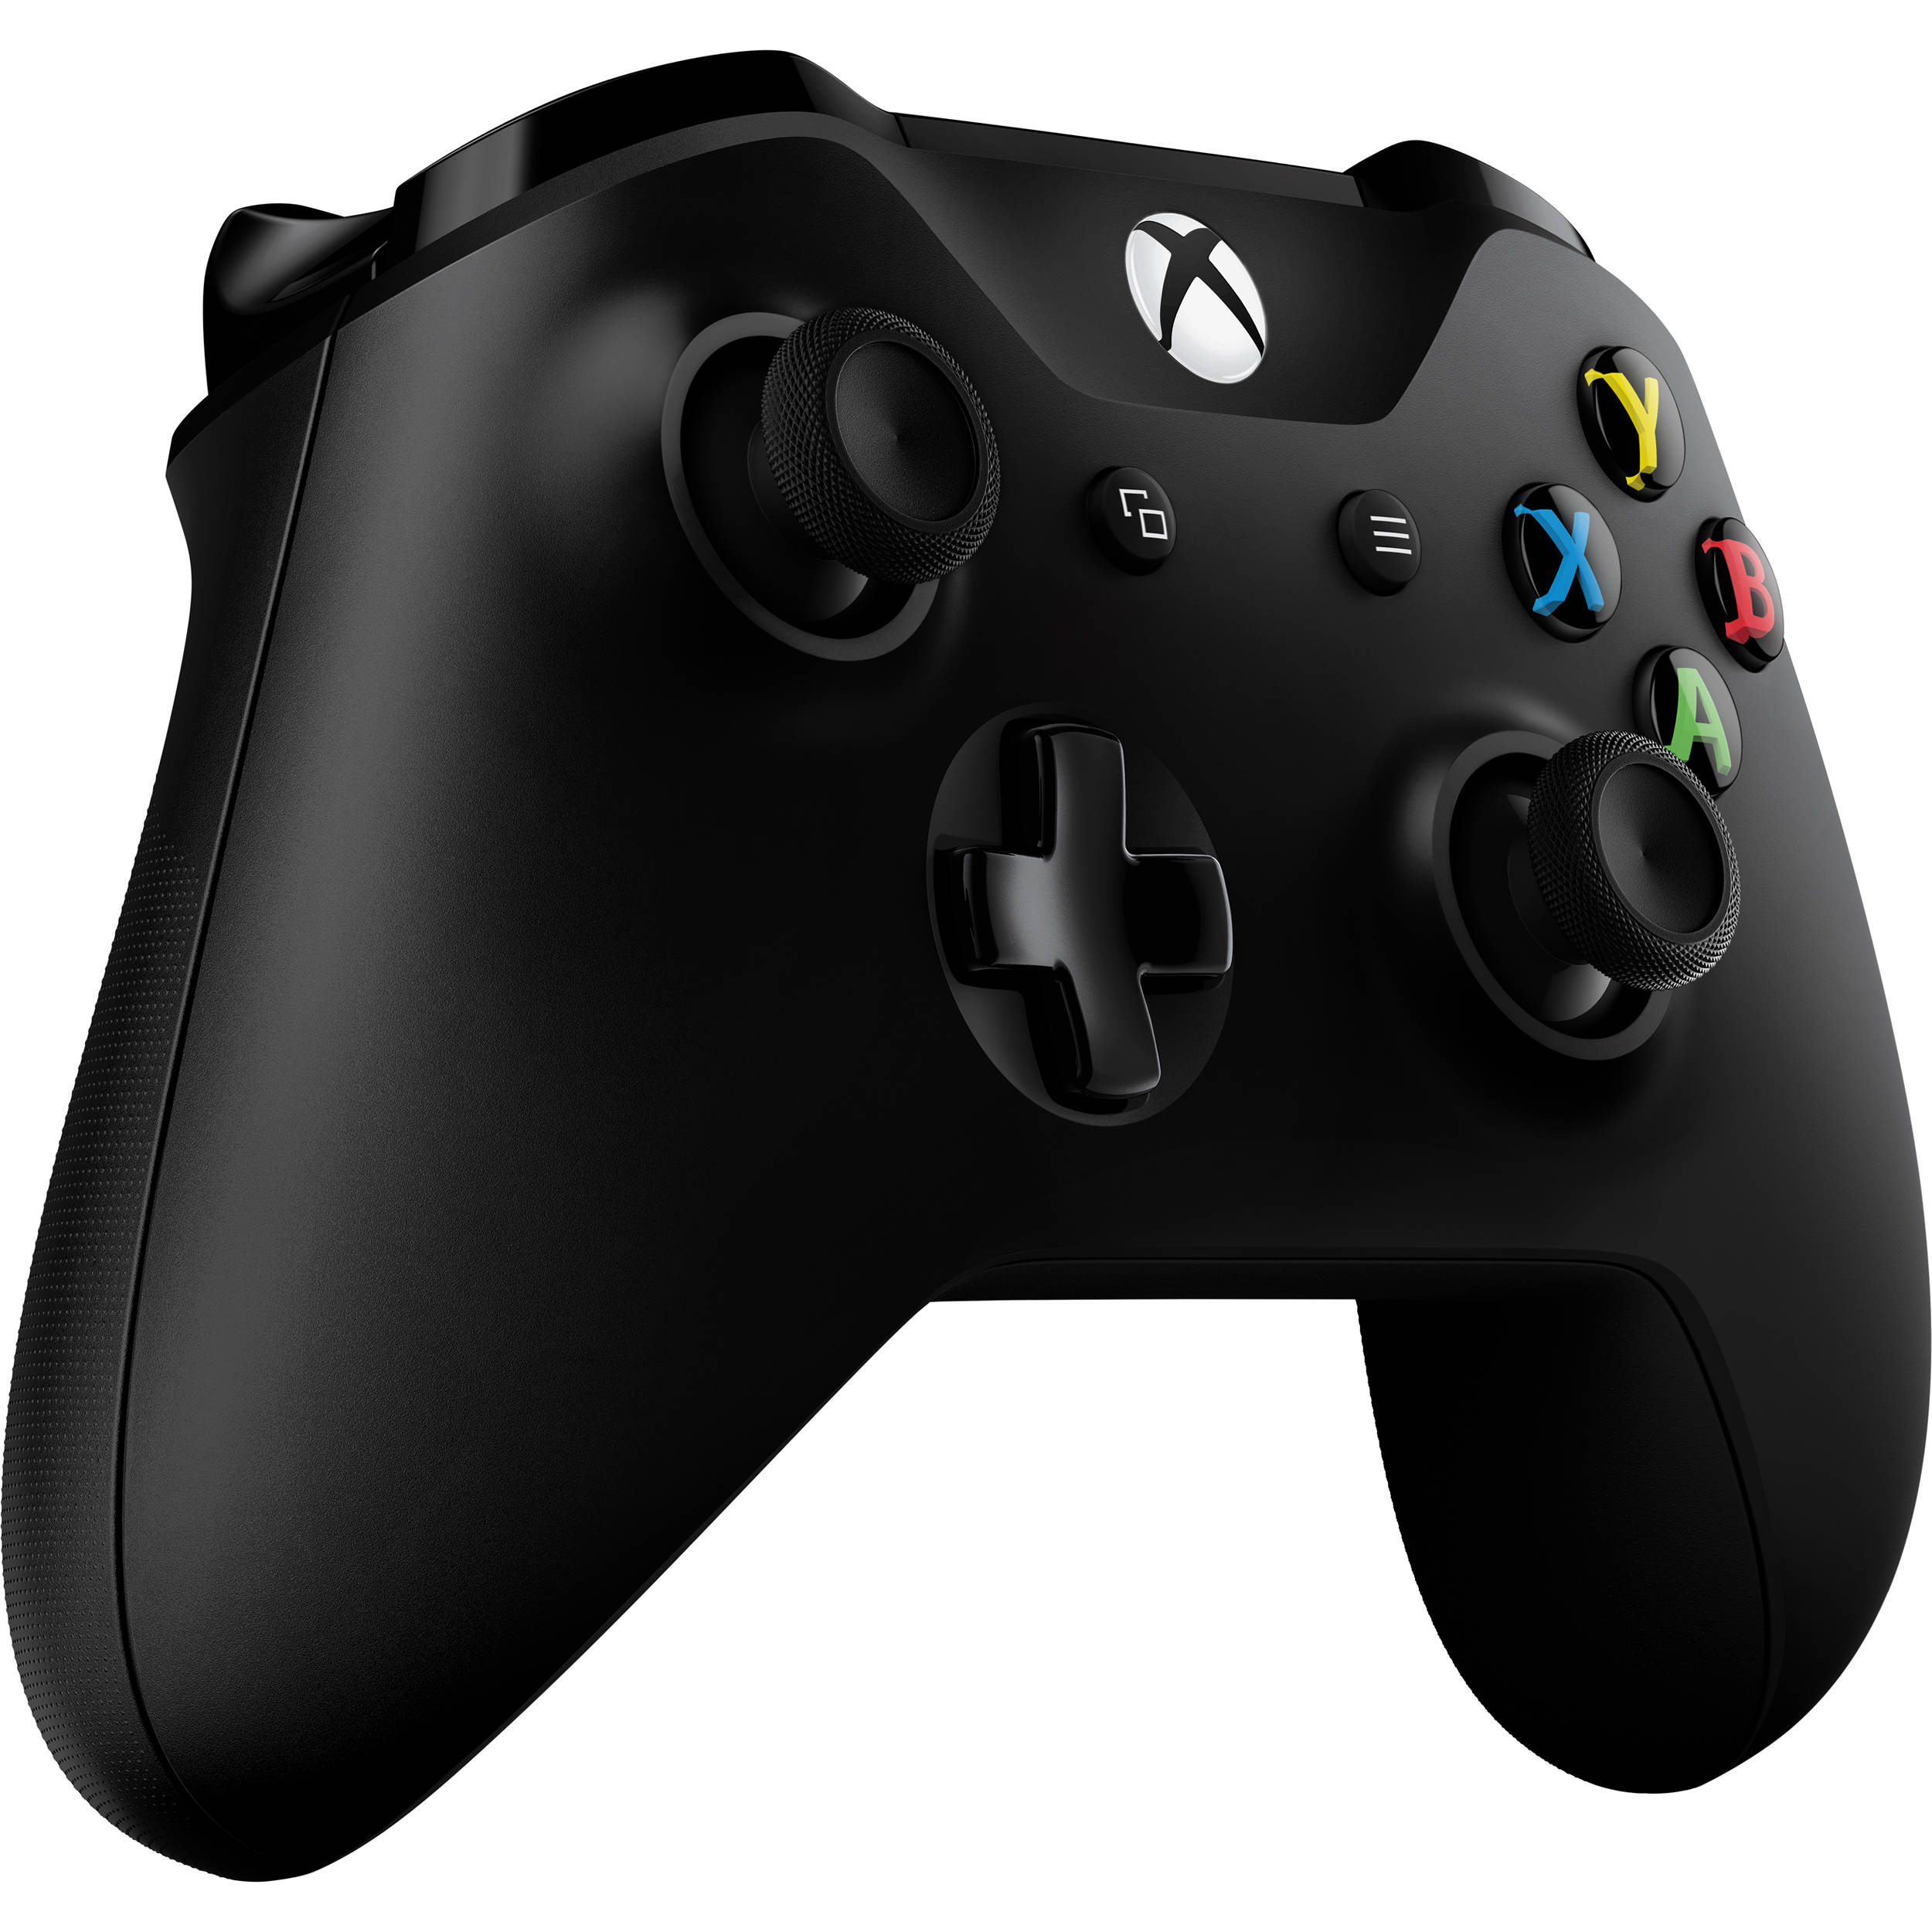 xbox 360 controller driver windows 10 download free